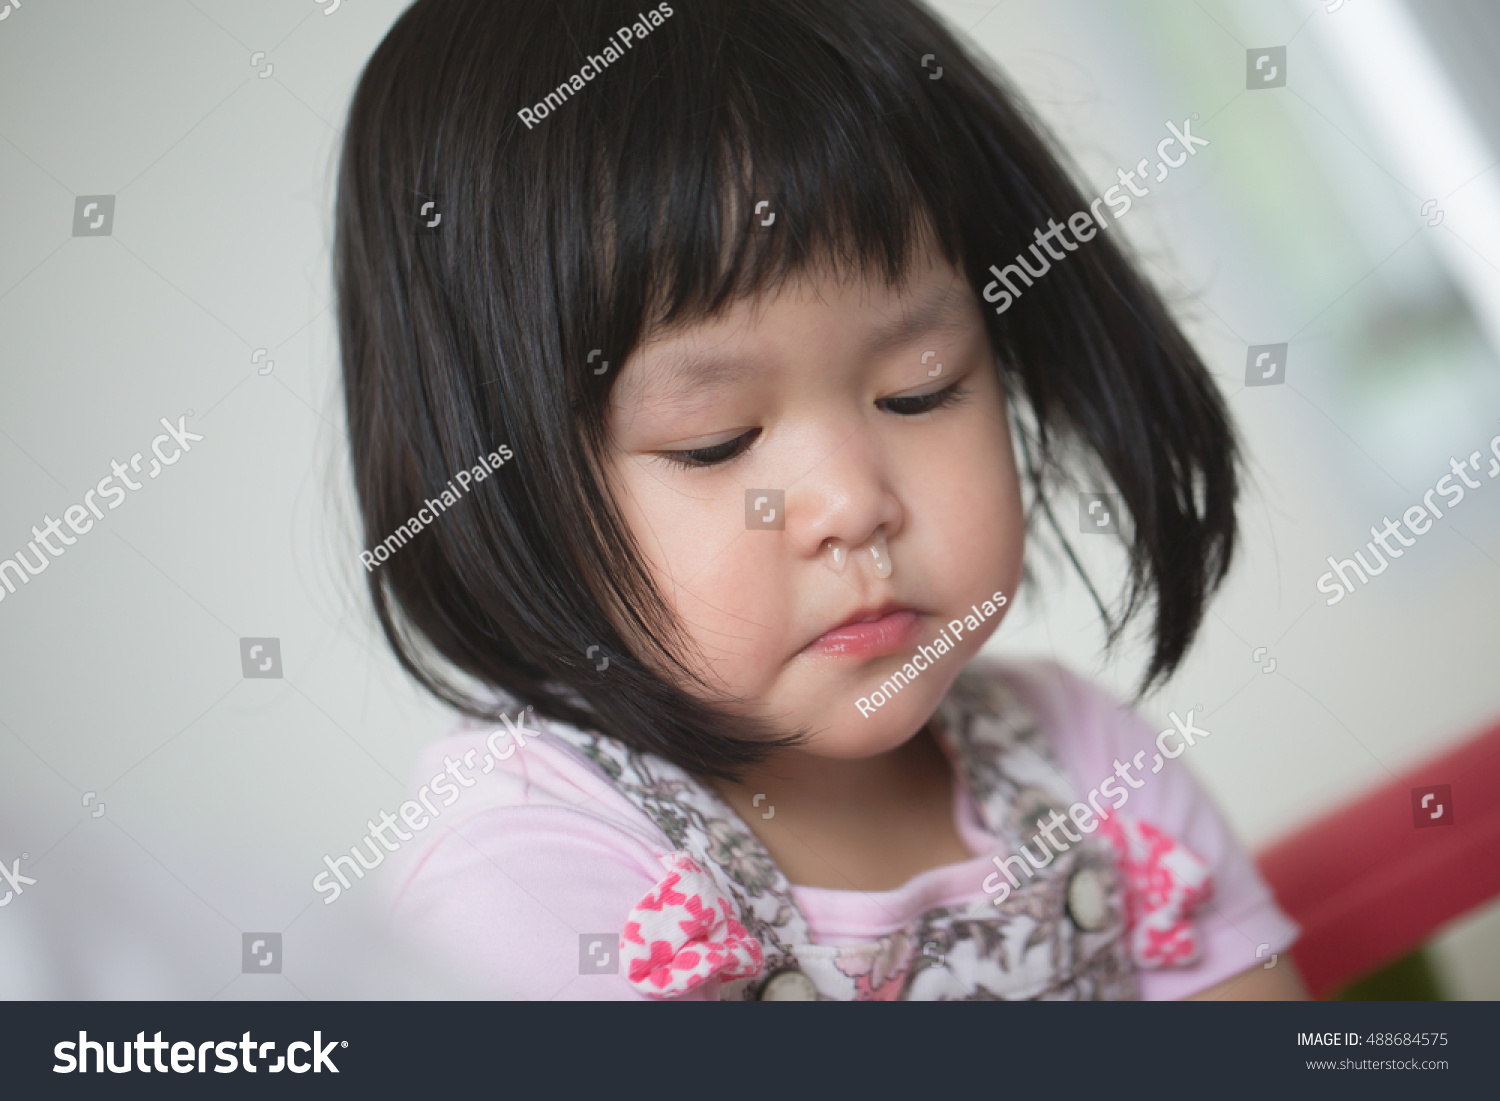 Little Asian Child Sick With Flu Sneezing Stock Photo 488684575 ...